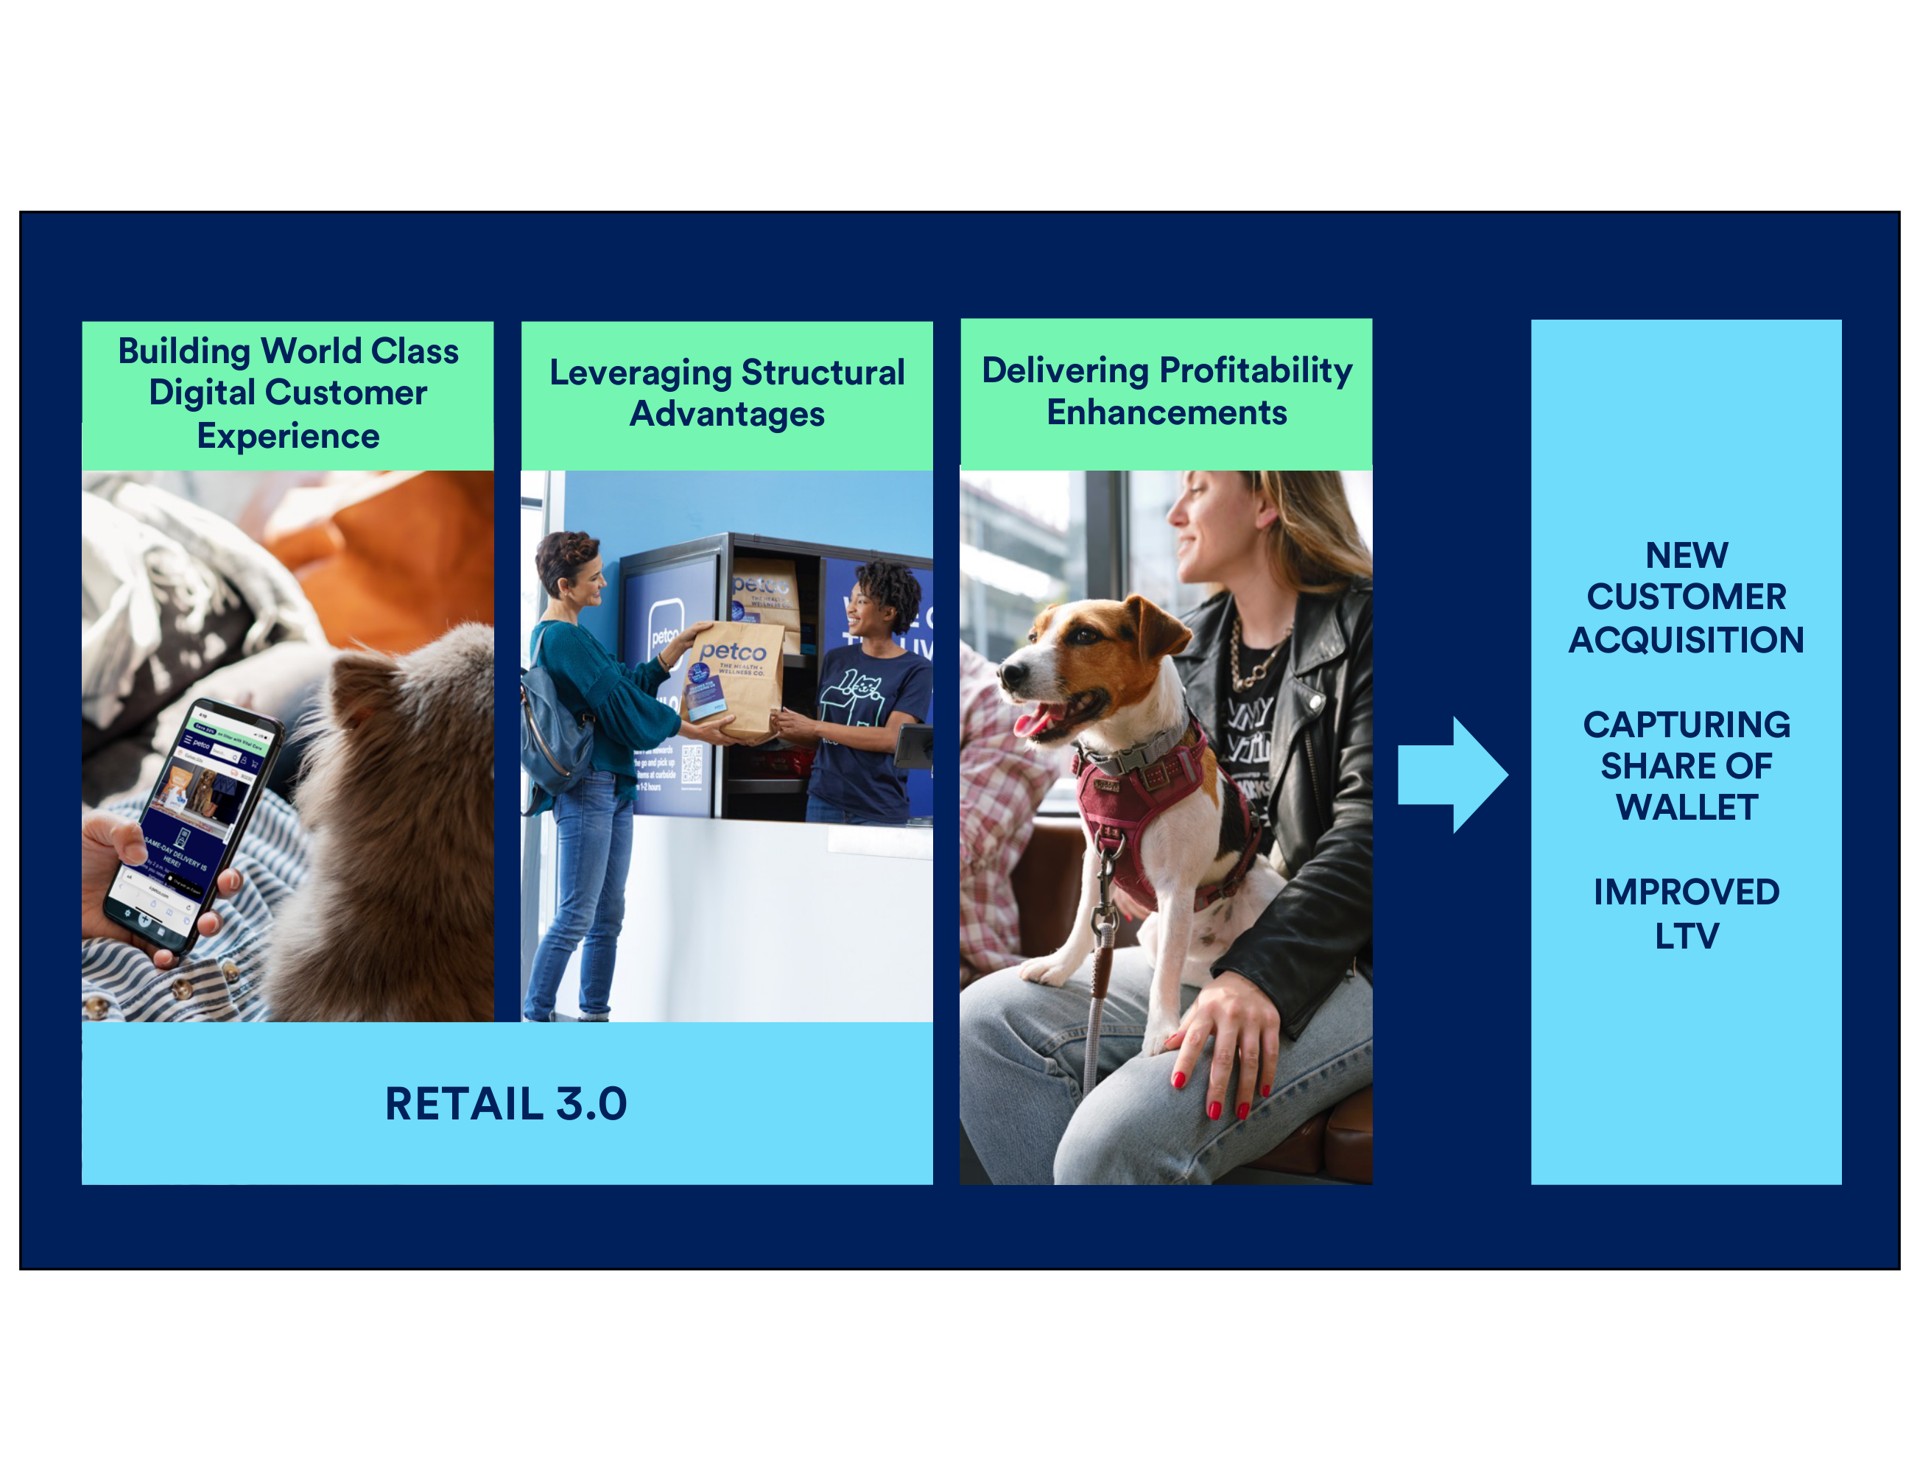 retail building world class digital customer experience leveraging structural advantages delivering profitability enhancements new customer acquisition improved capturing share of wallet | Petco